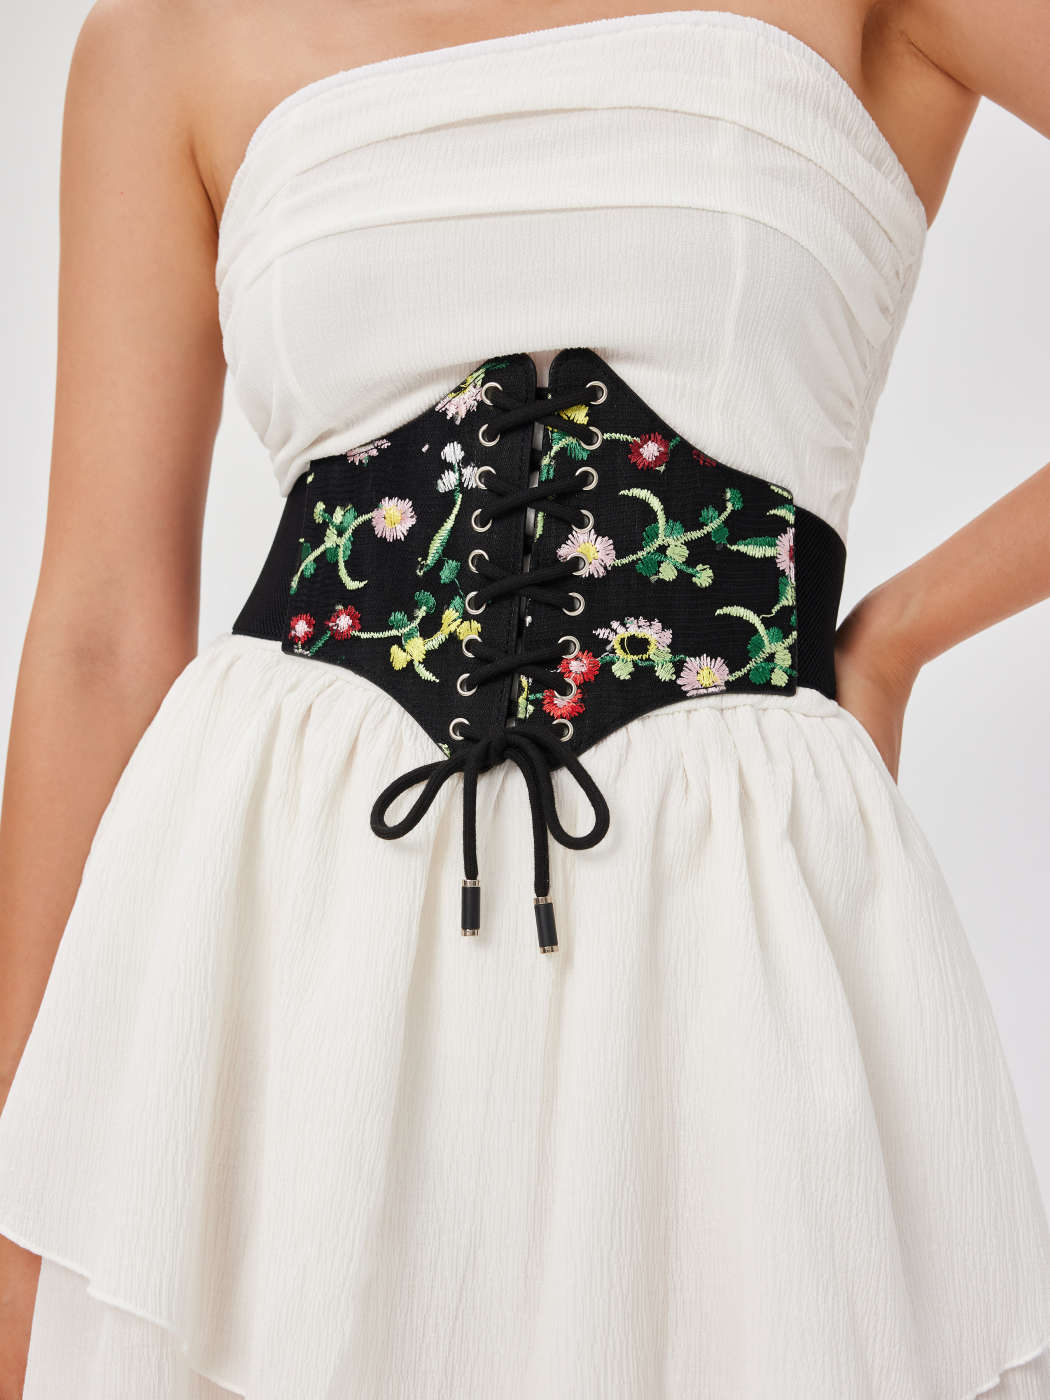 Lace Up Embroidery Corset Belt - Cider